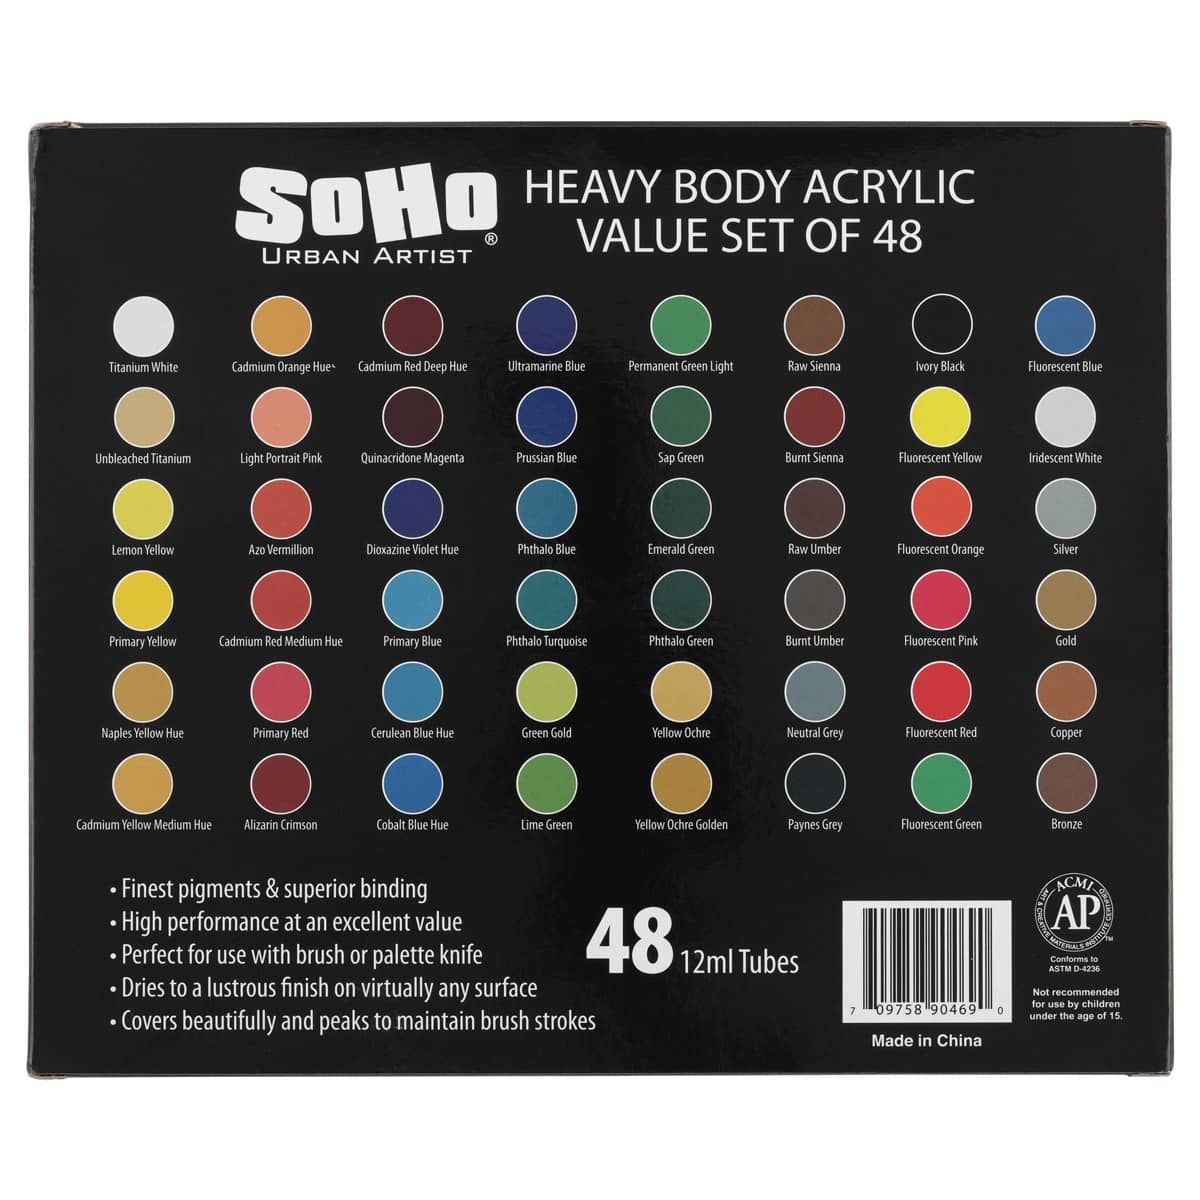  Soho Urban Artist Acrylic Paint - Thick, Rich, Water-Resistant,  Heavy Body Paint, Phthalo Green (Blue Shade), 250 ml Tube : Arts, Crafts &  Sewing